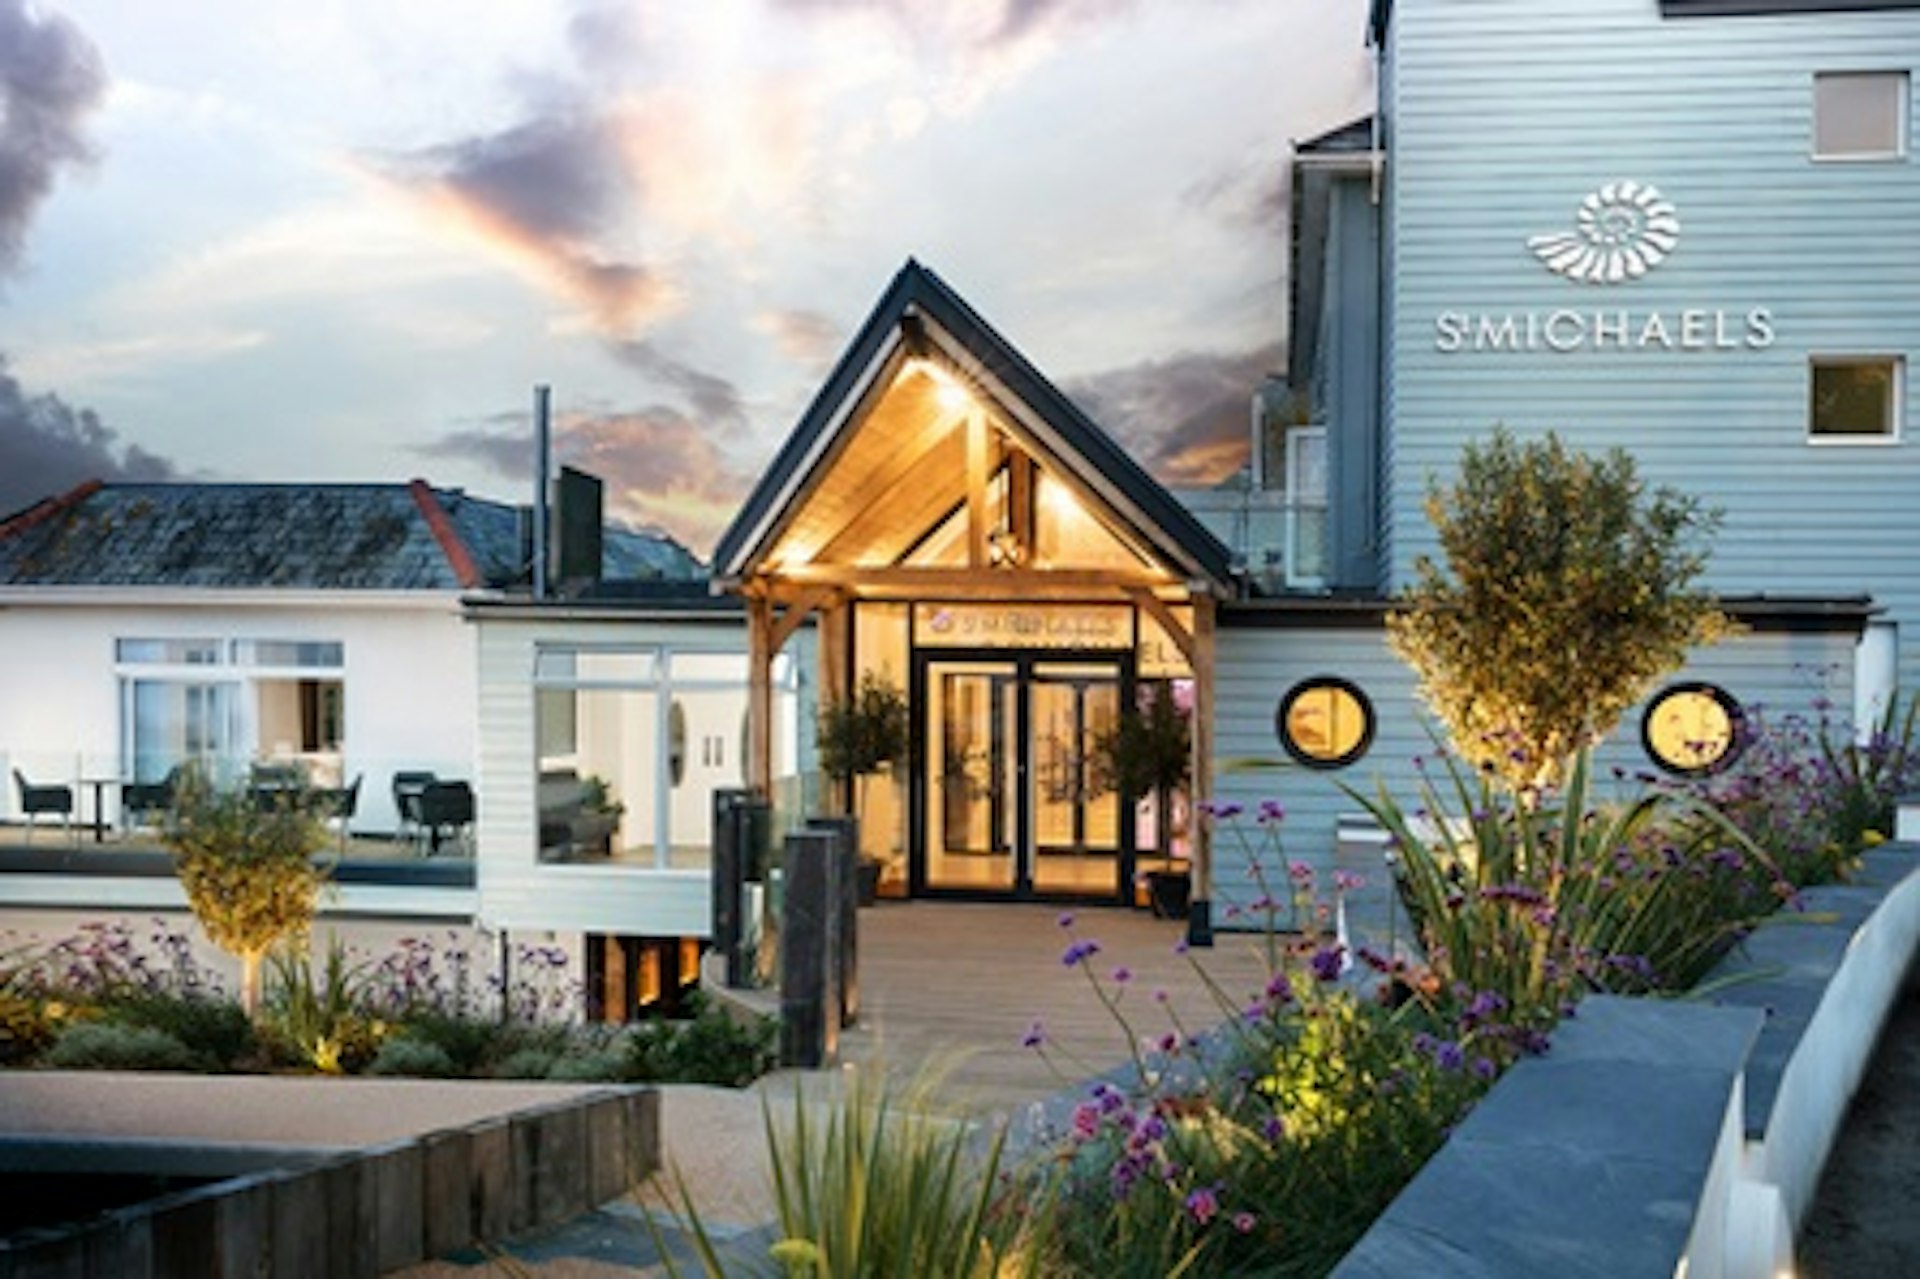 One Night Cornish Coast Escape with Dinner and Hydrothermal Spa Experience for Two at the 4* Luxury St Michaels Resort 4